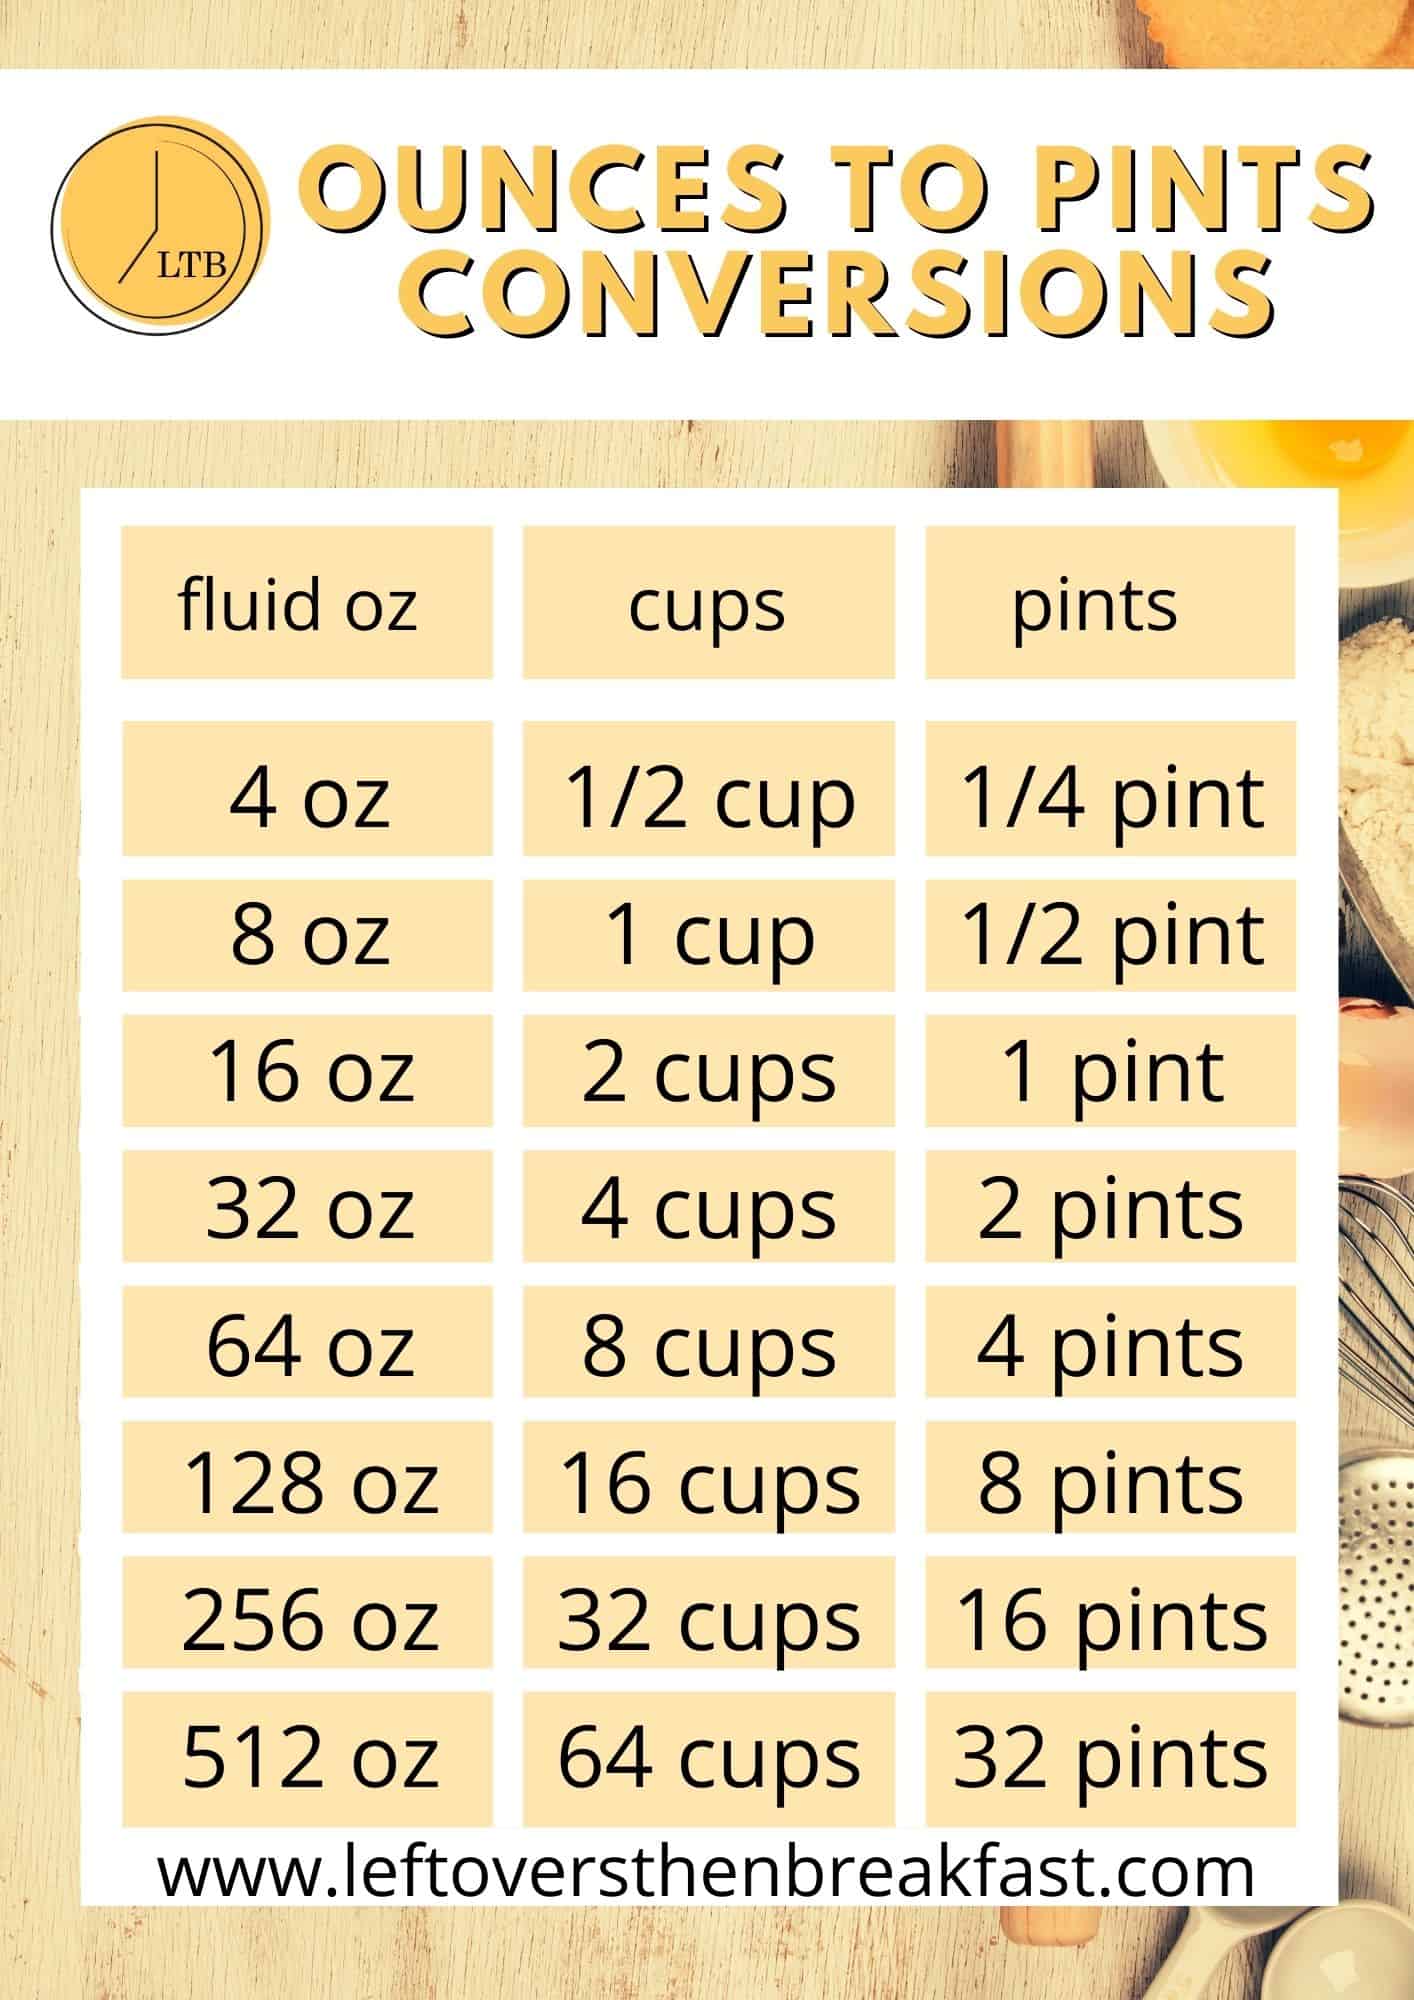 ounces to pints conversion table